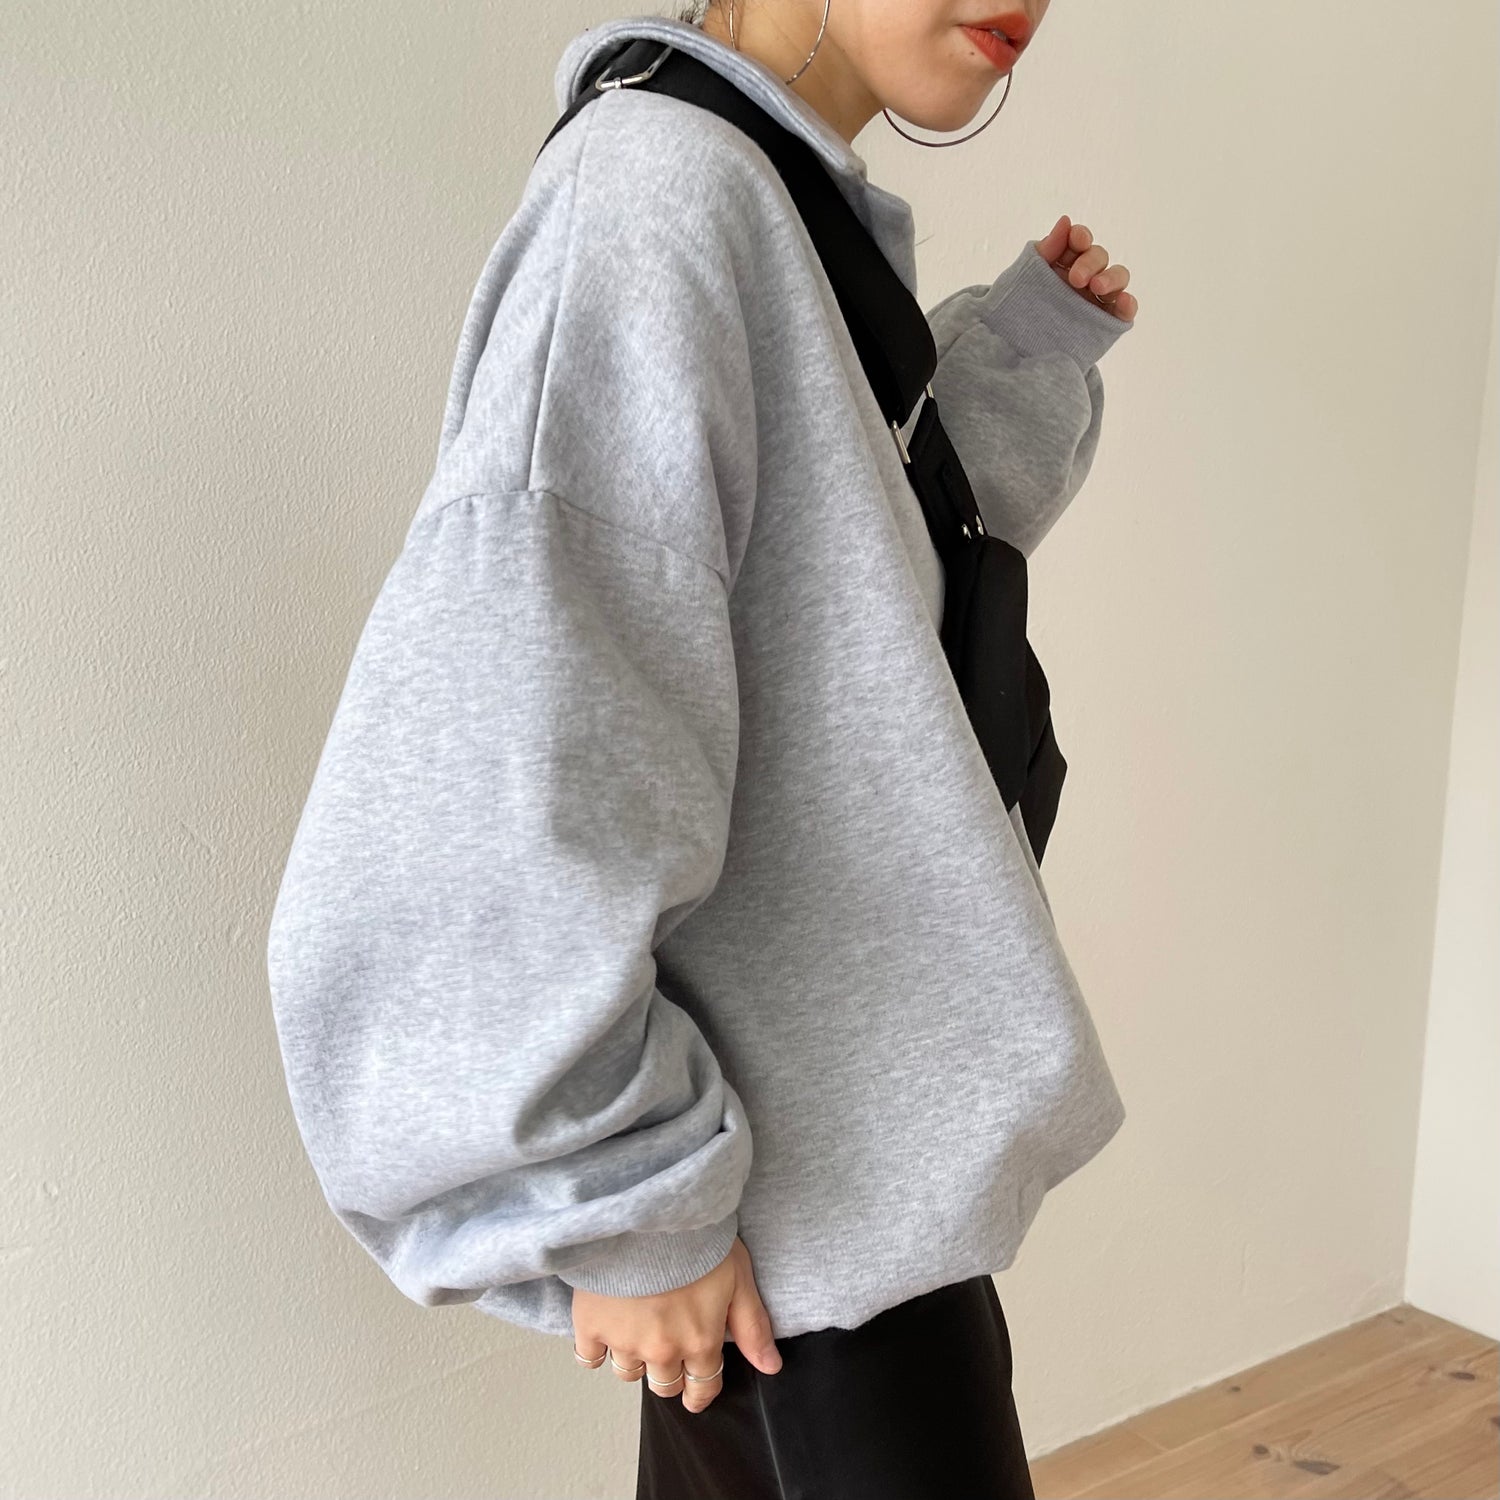 L'Appartement 【レミレリーフ】Oversize Sweat グレー